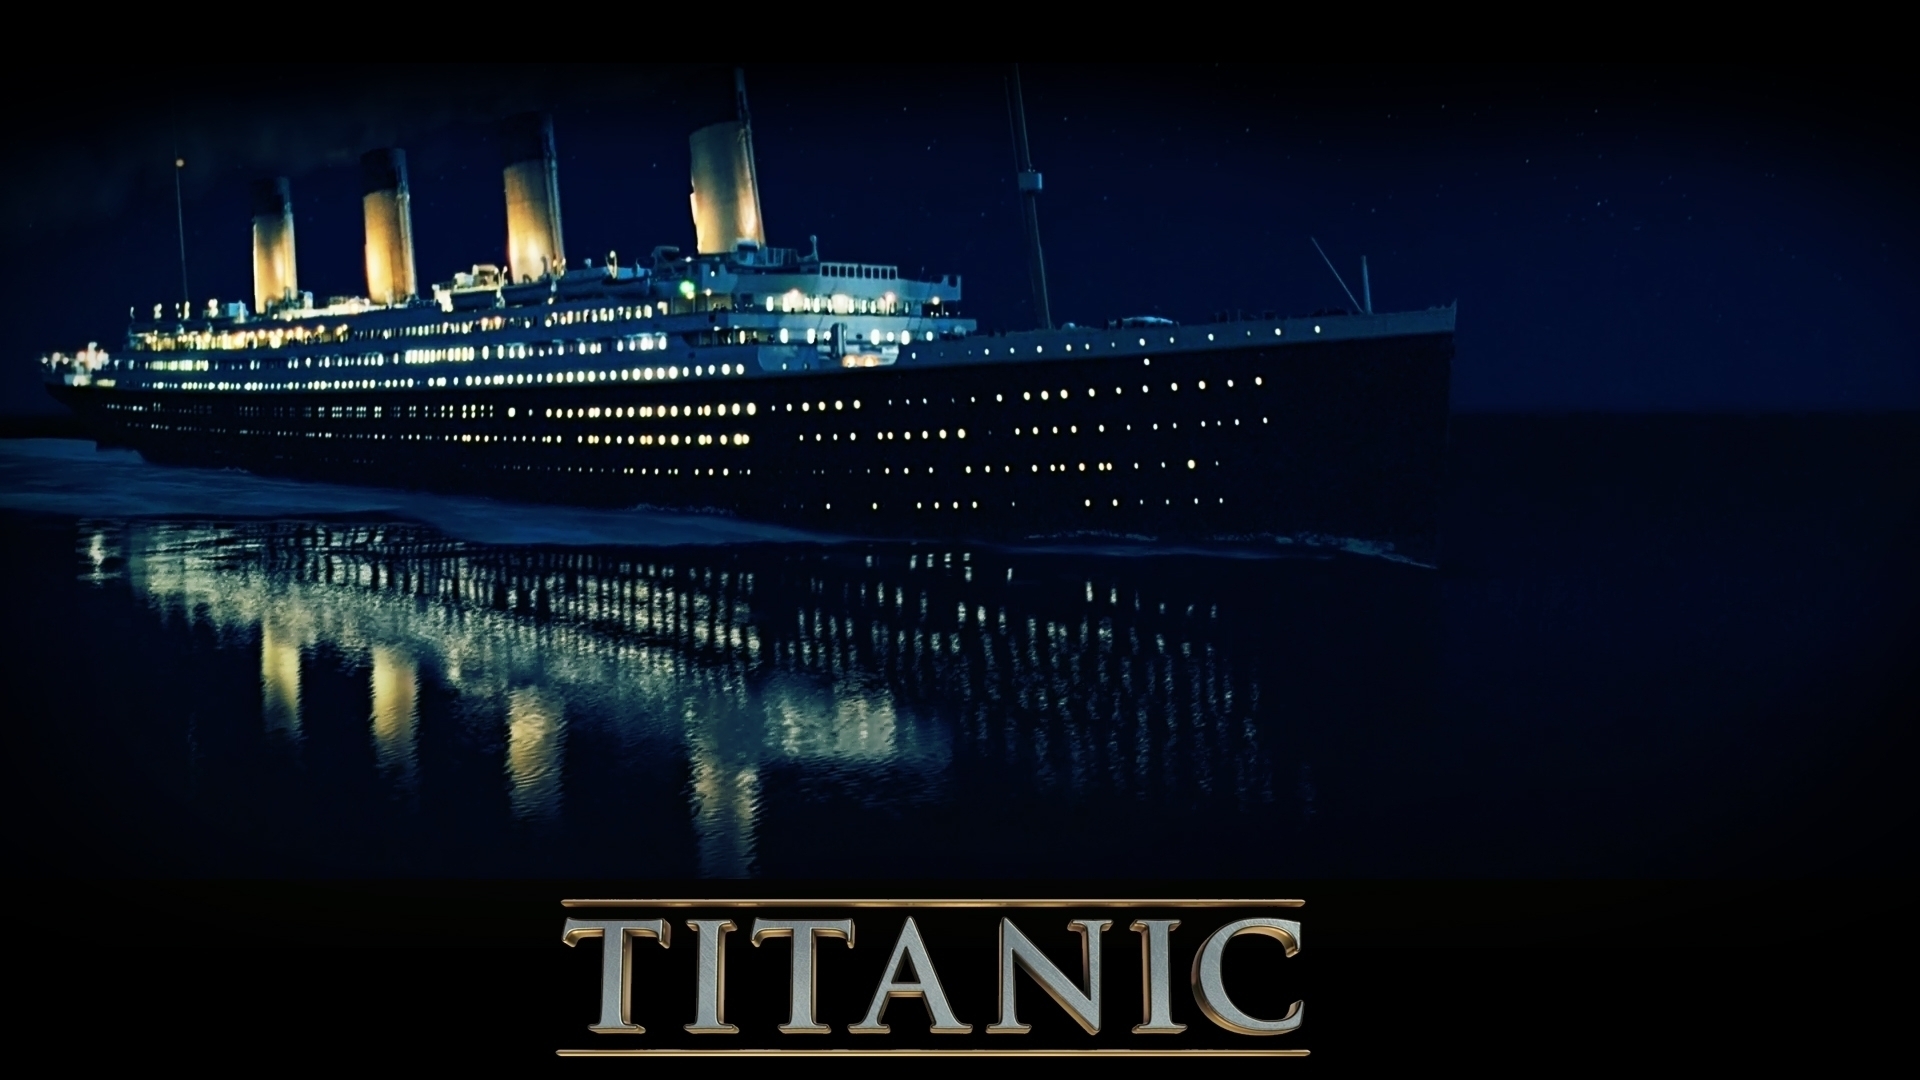 Titanic k wallpapers for your desktop or mobile screen free and easy to download